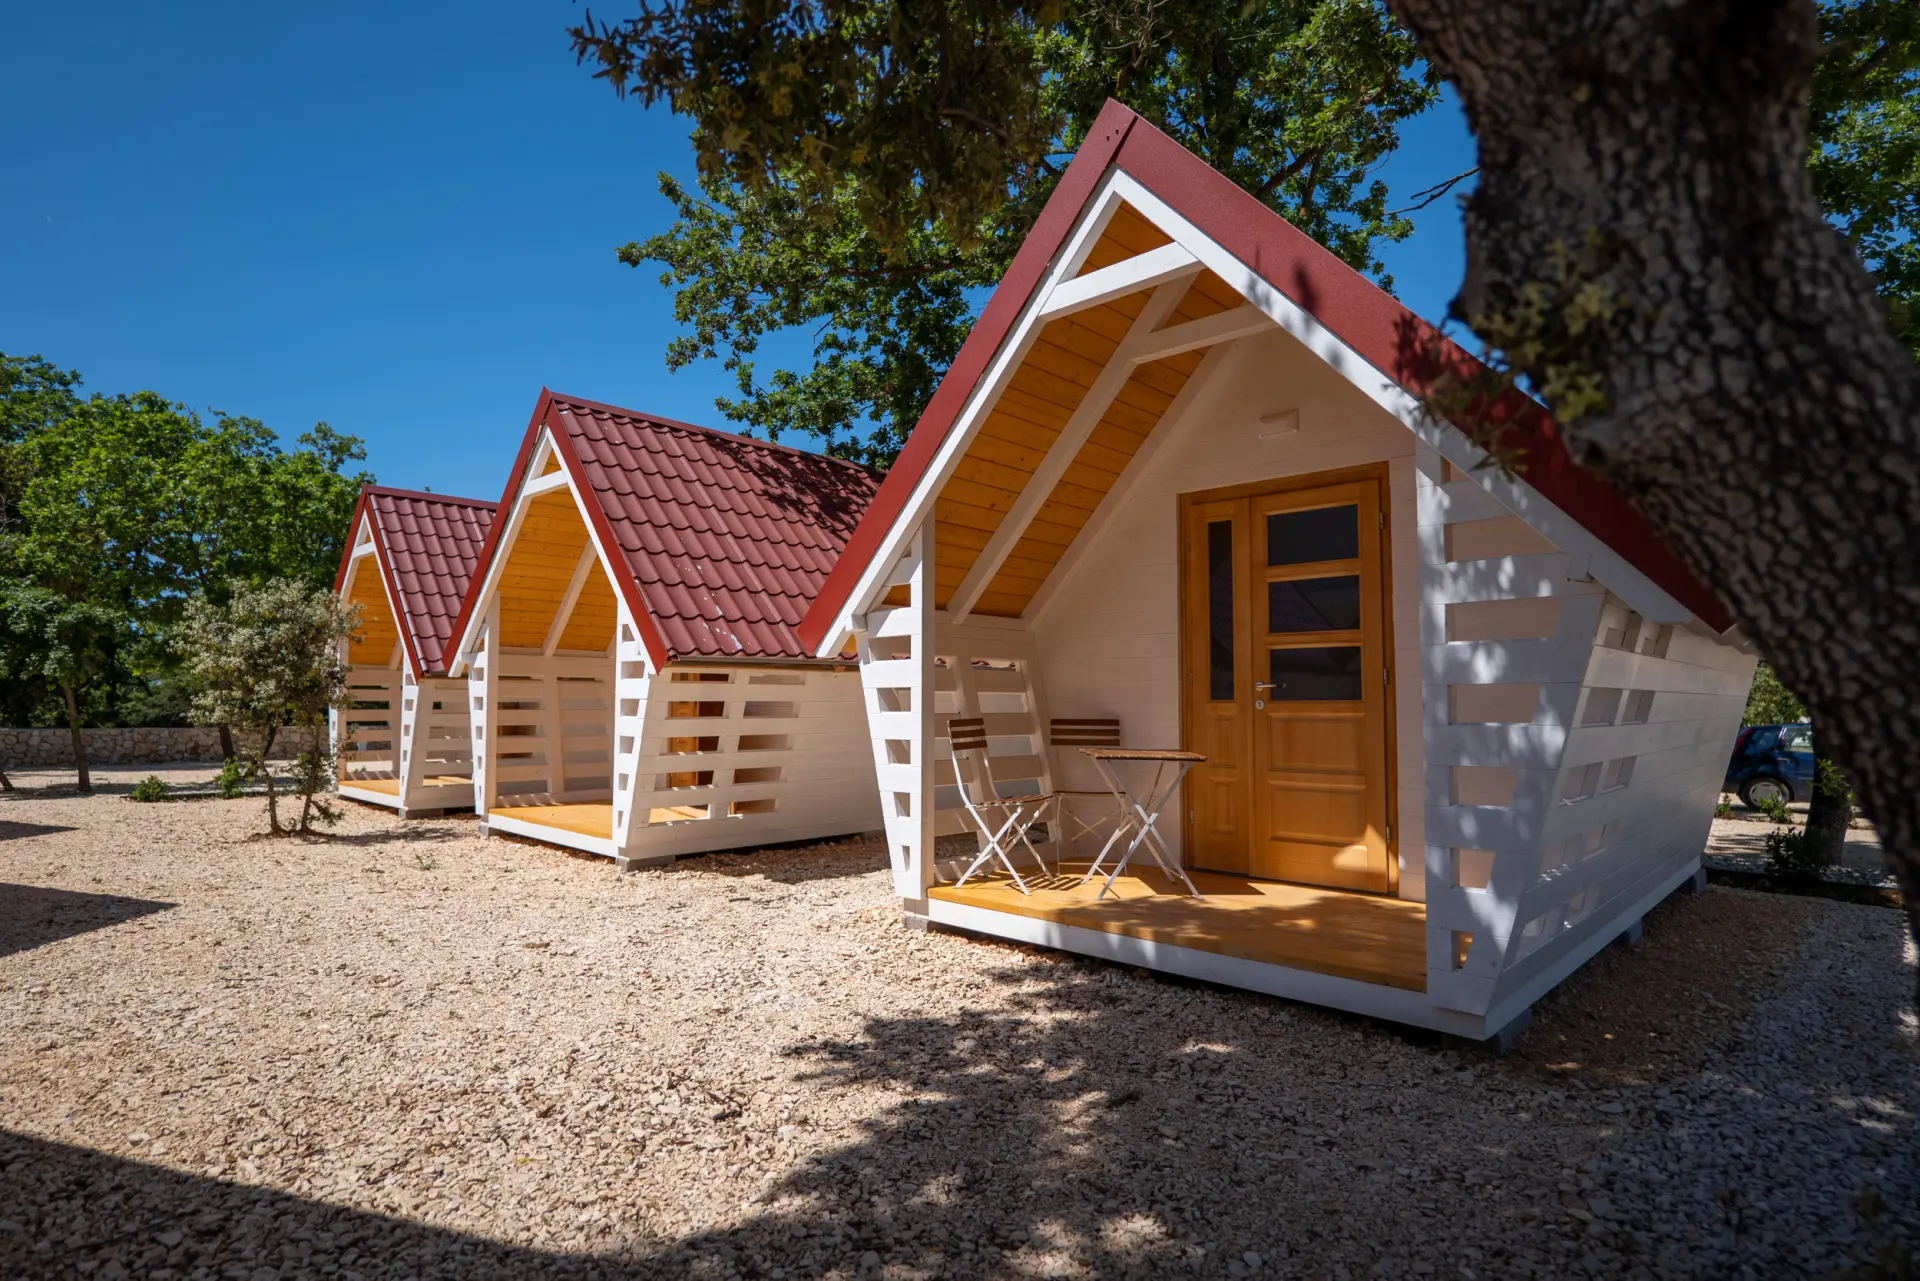 Row of 3 glamping huts with terrasses under oak trees